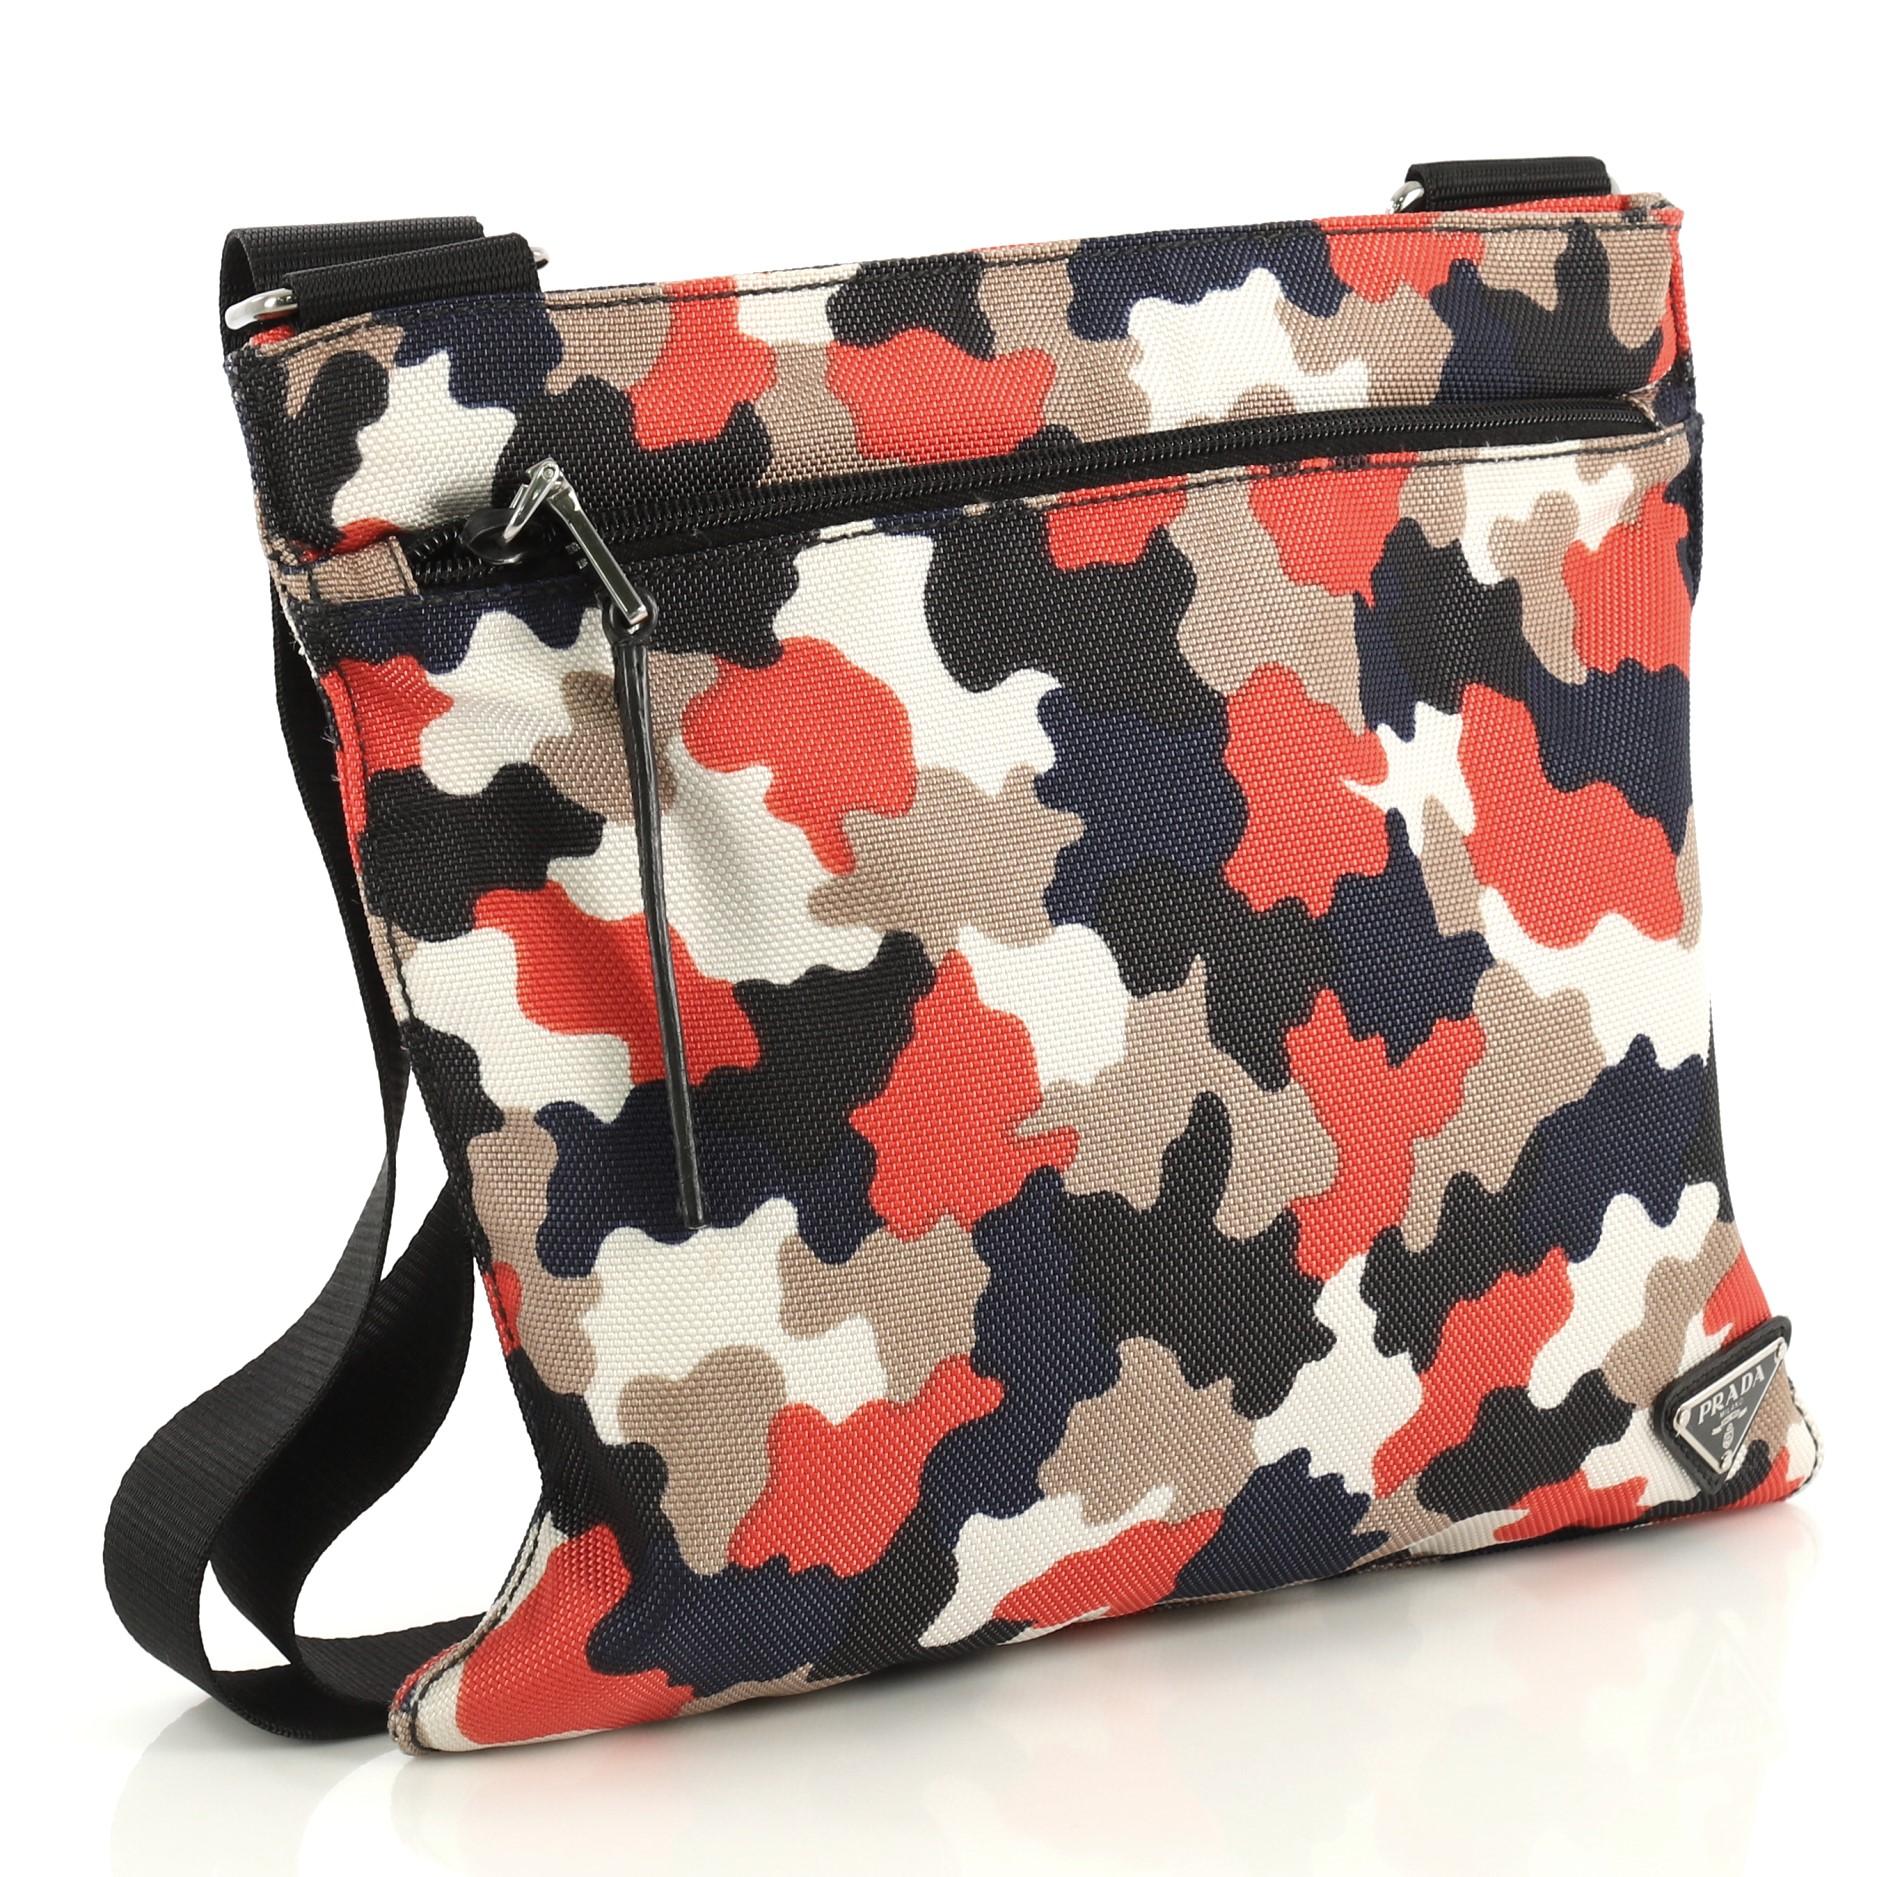 This Prada Zip Crossbody Bag Camouflage Canvas Medium, crafted in blue, orange and neutral canvas, features an adjustable strap, exterior front zip pocket, and silver-tone hardware. Its top zip closure opens to a black fabric interior. 

Condition: